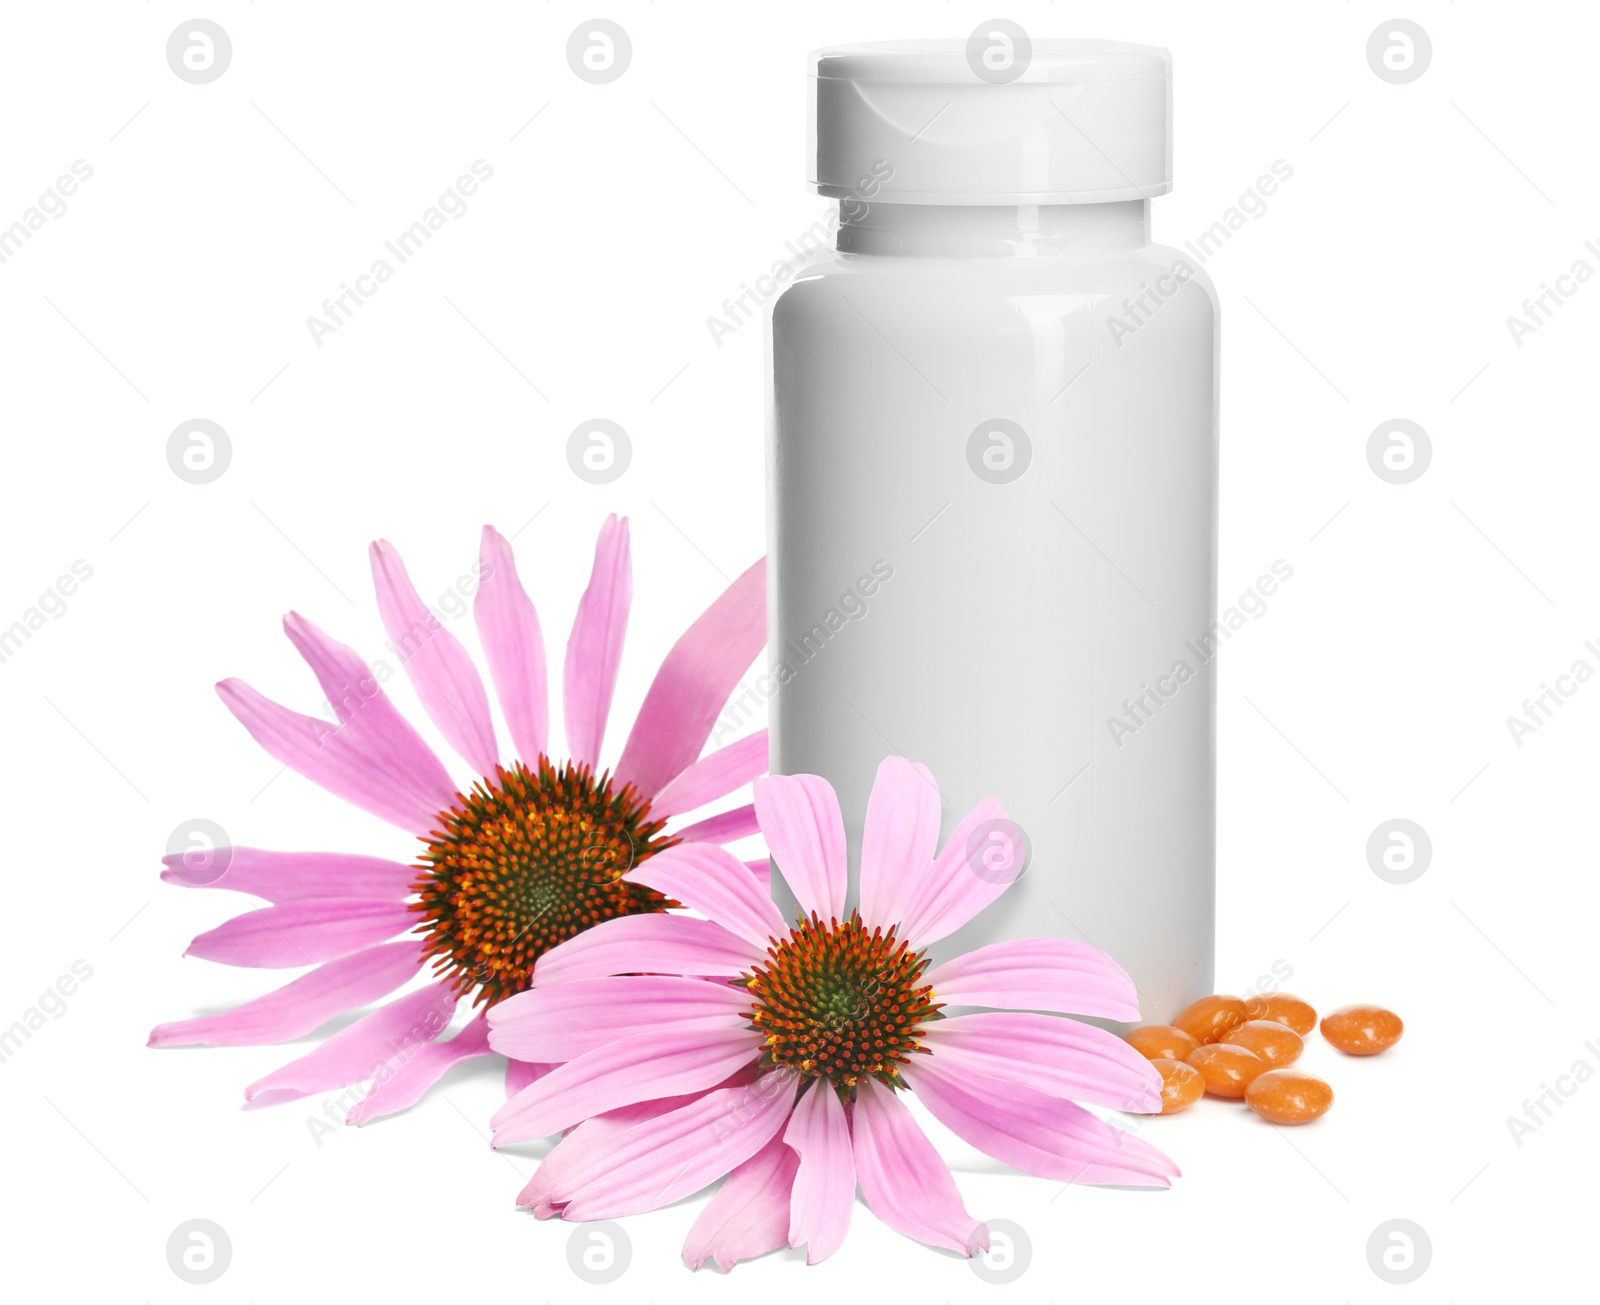 Image of Bottle with vitamin pills and beautiful echinacea flowers on white background